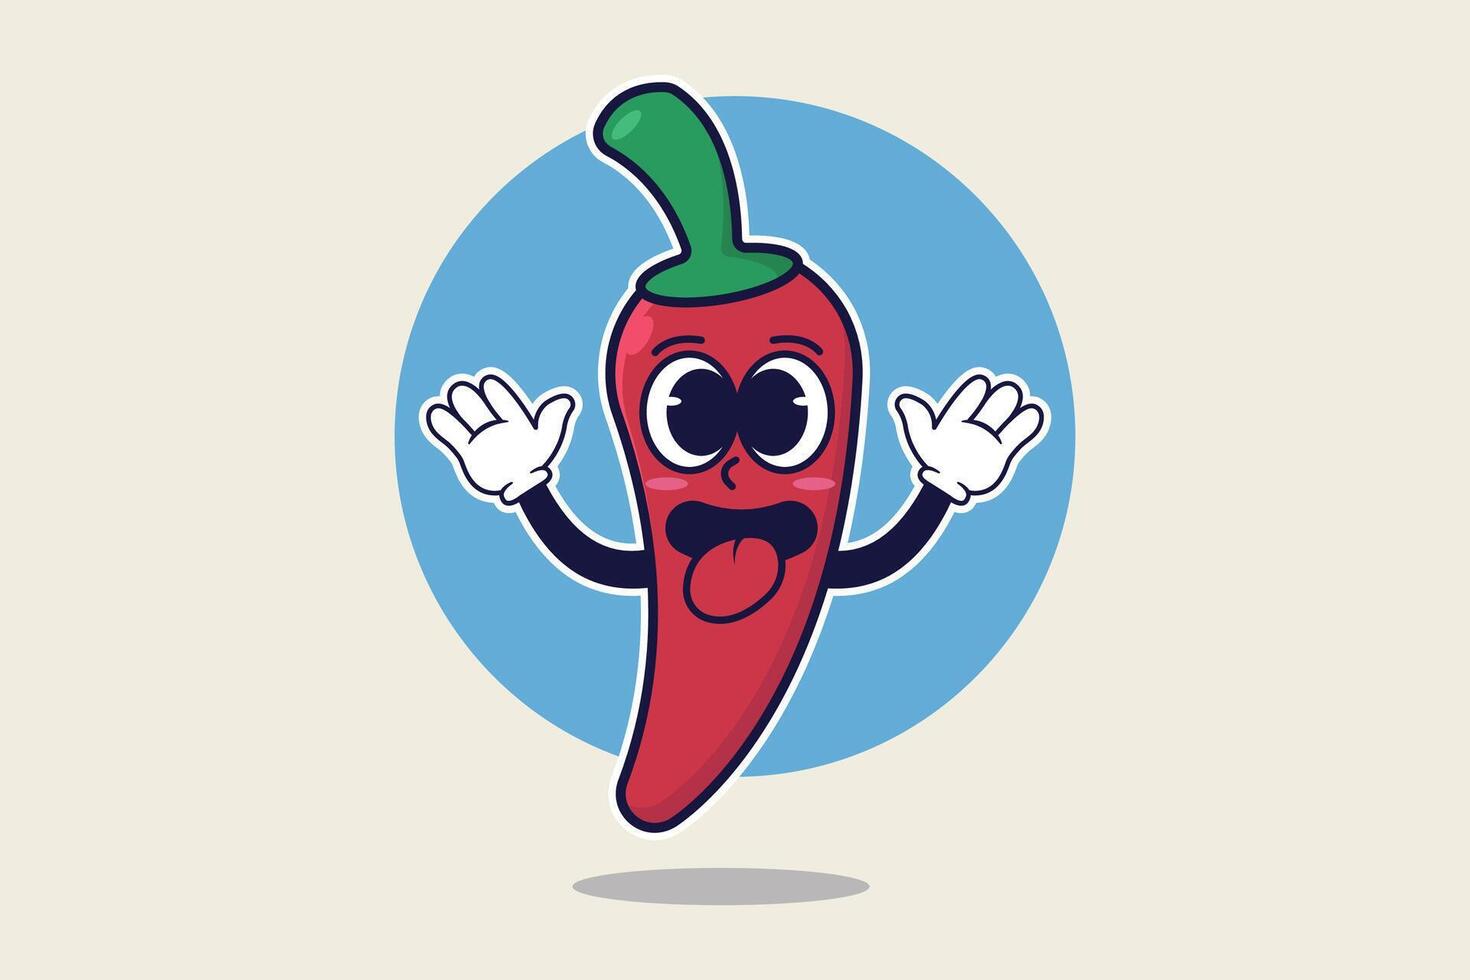 Chilli character mascot design with happy and funny expression, vector illustration